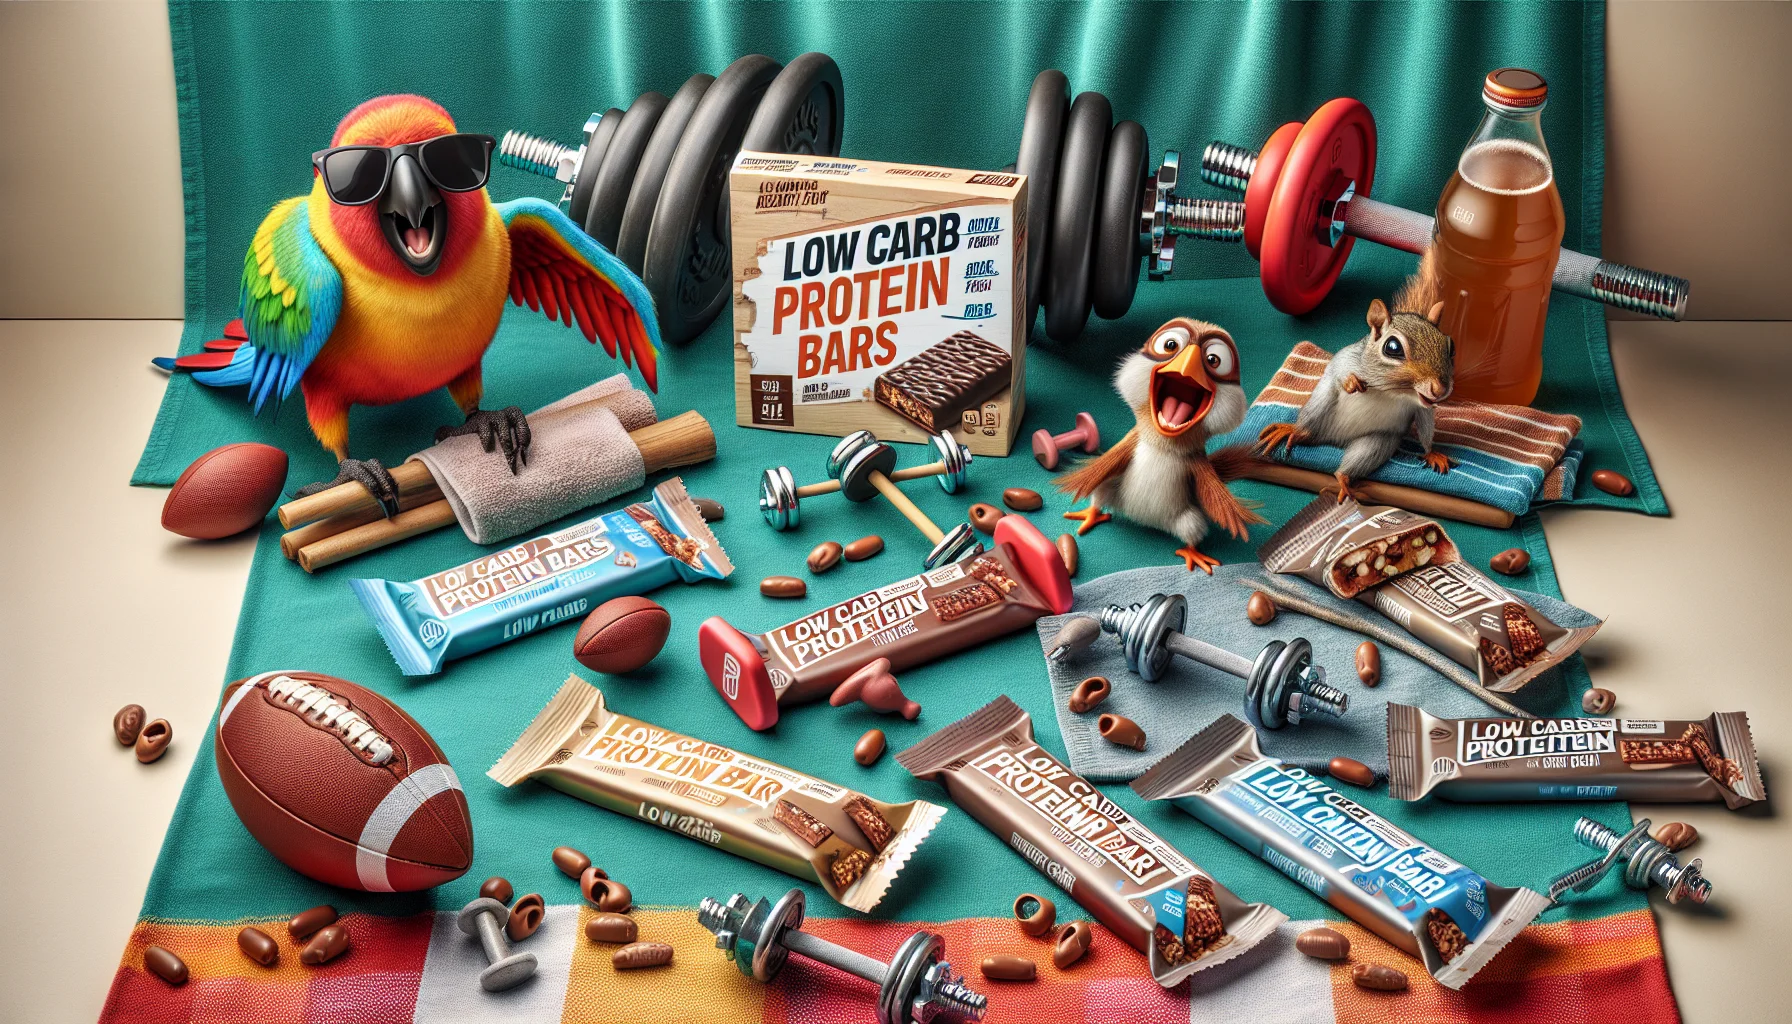 Create a hilariously enticing image showcasing a variety of low carb protein bars. They are laid out on a colorful picnic blanket with clearly visible nutritional information. Various athletic equipment such as weights, a football, and running shoes are scattered around. Nearby, a comical parrot with sunglasses is trying to lift a small dumbbell, while a laughing squirrel attempts to open a protein bar with its tiny paws. Both of these characters symbolize the humor and charm of engaging in sports activities while supplementing with low-carb protein bars.